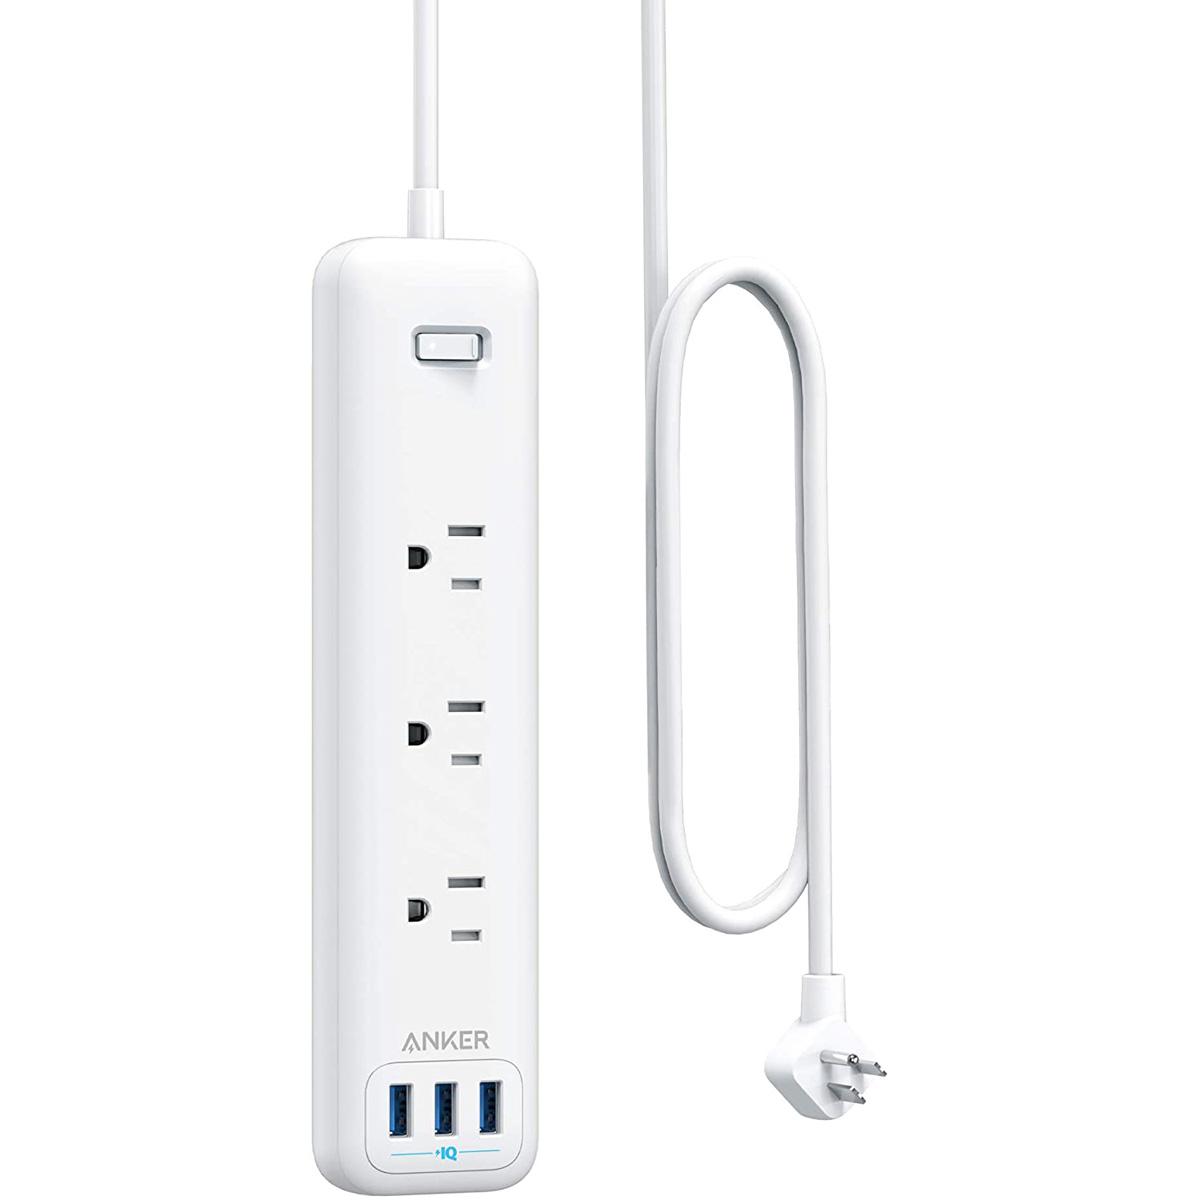 Anker Power Strip with 3 Outlets 3 USB Surge Protector for $14.99